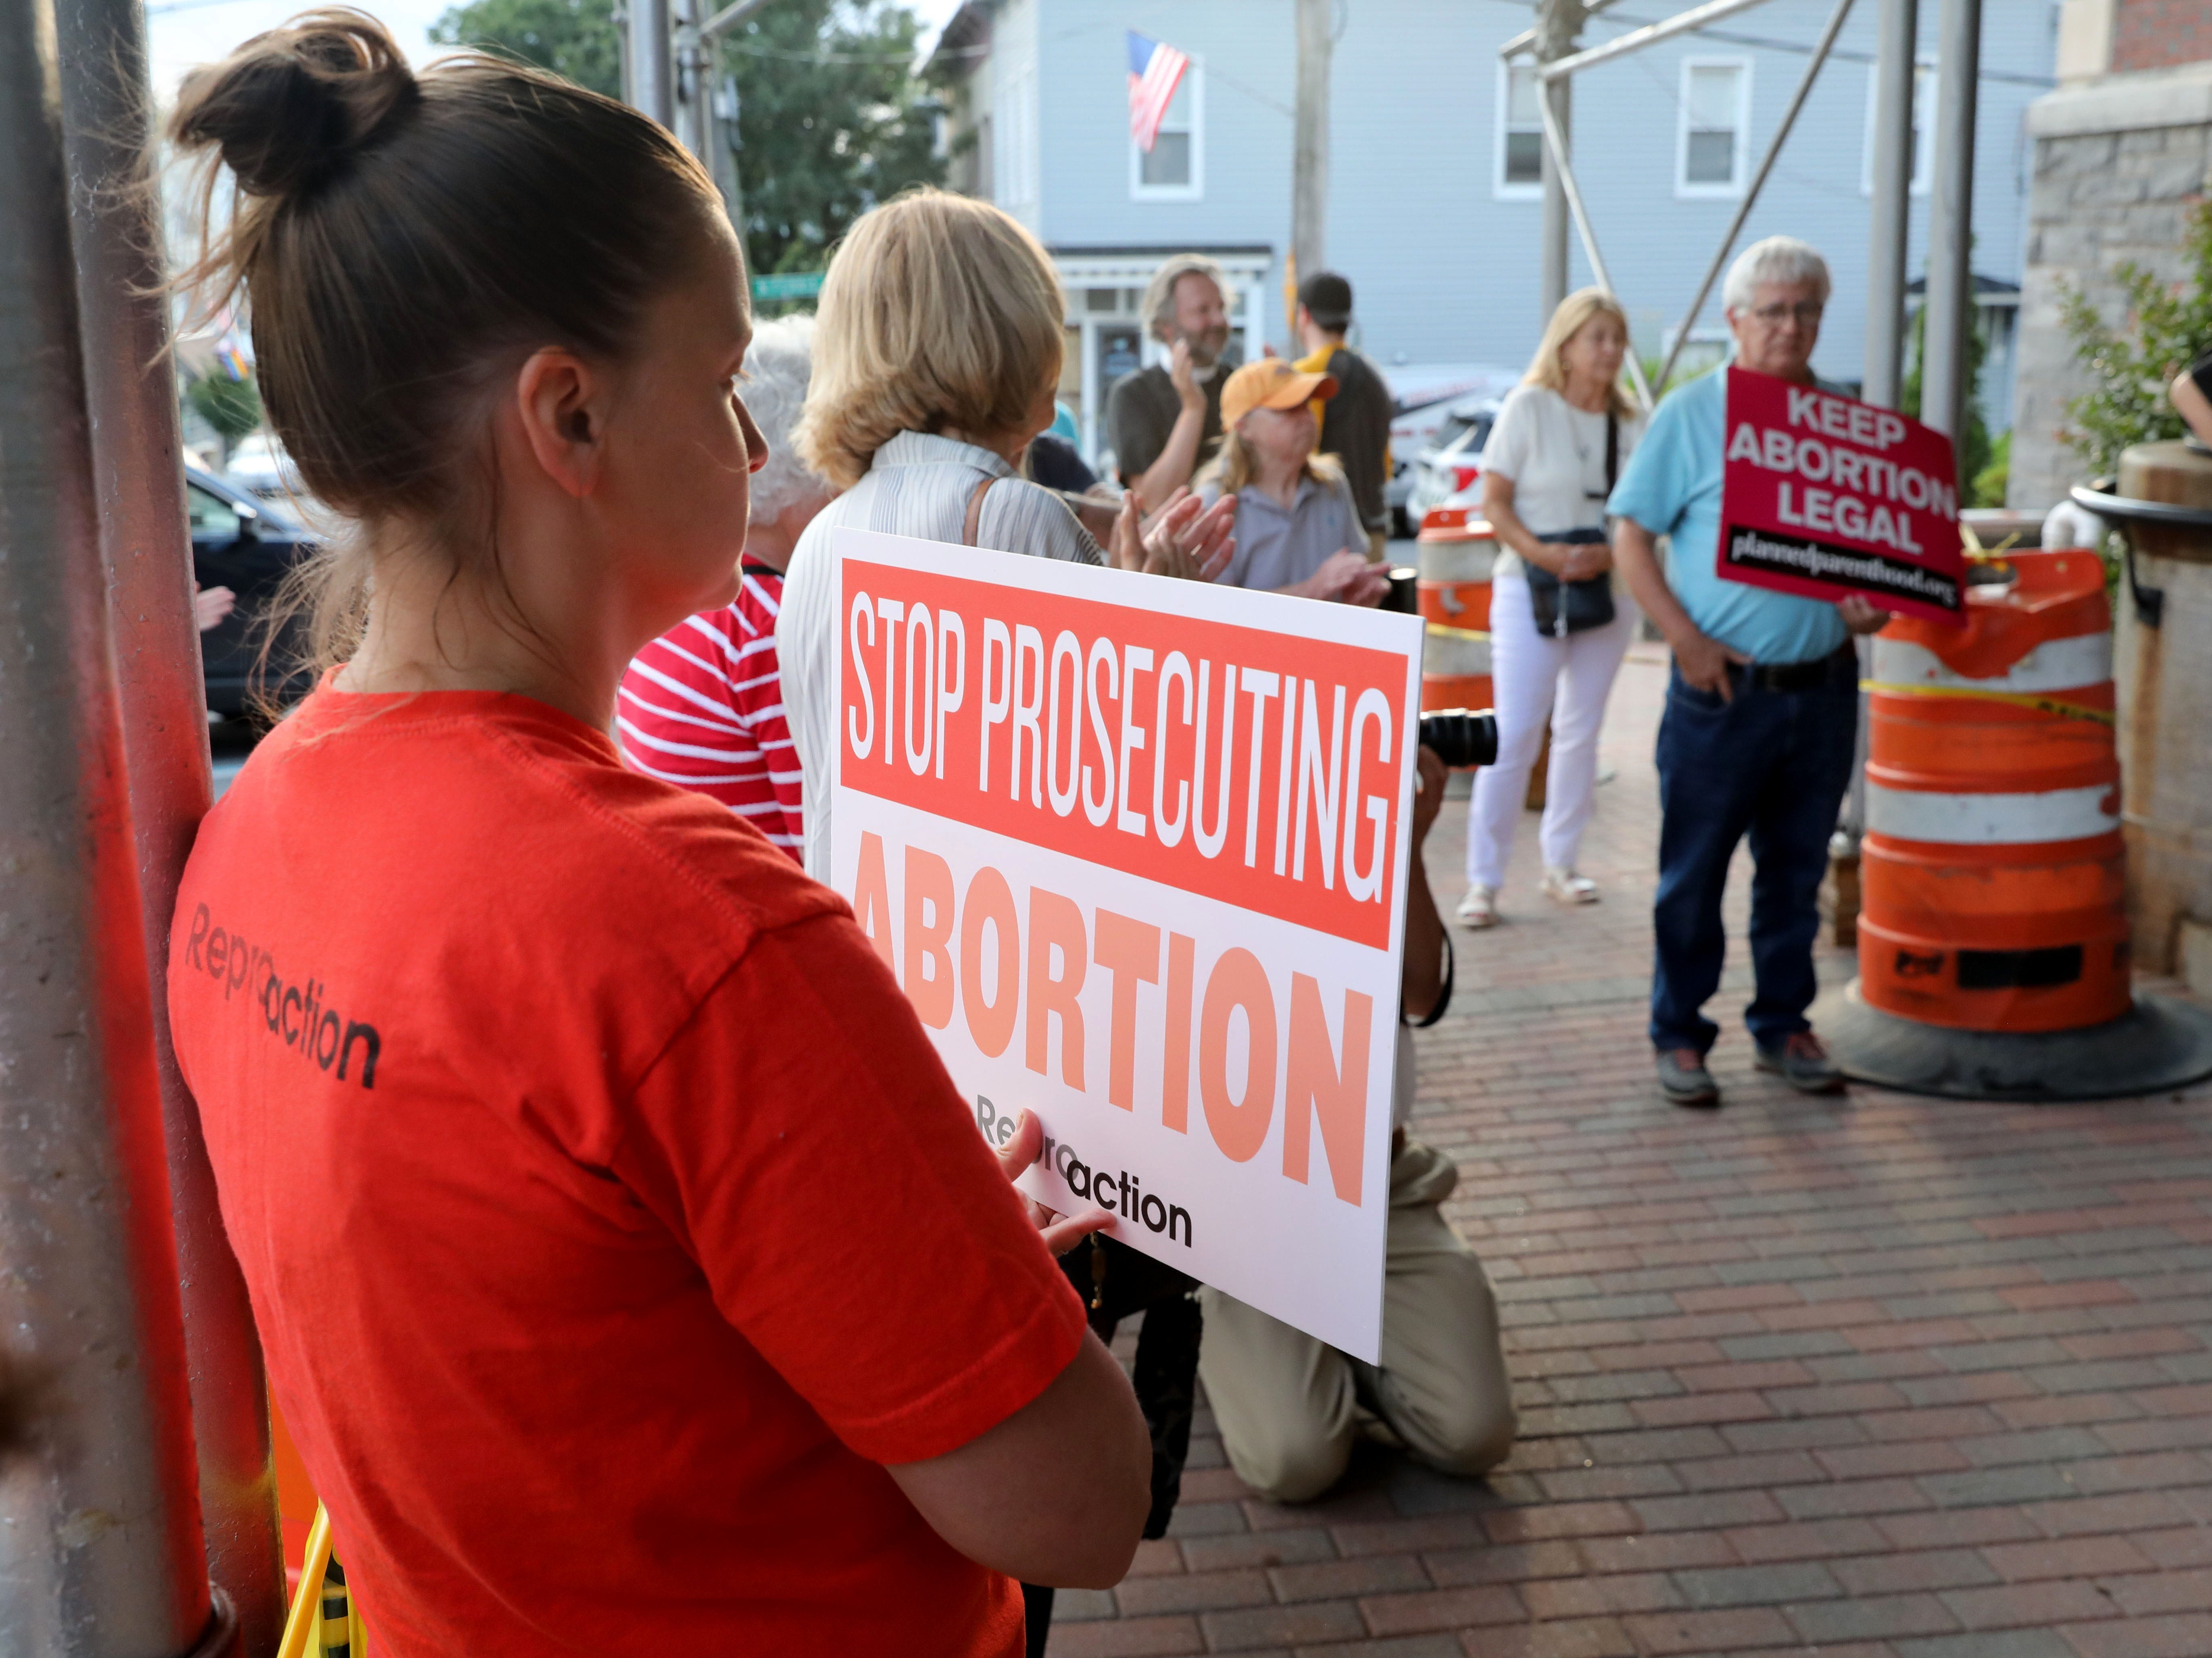 Elizabeth Skoski from Tarrytown holds a "Stop Prosecuting Abortion" sign during a gathering of abortion-rights concerned citizens in front of Irvington Town Hall, June 24, 2022. 